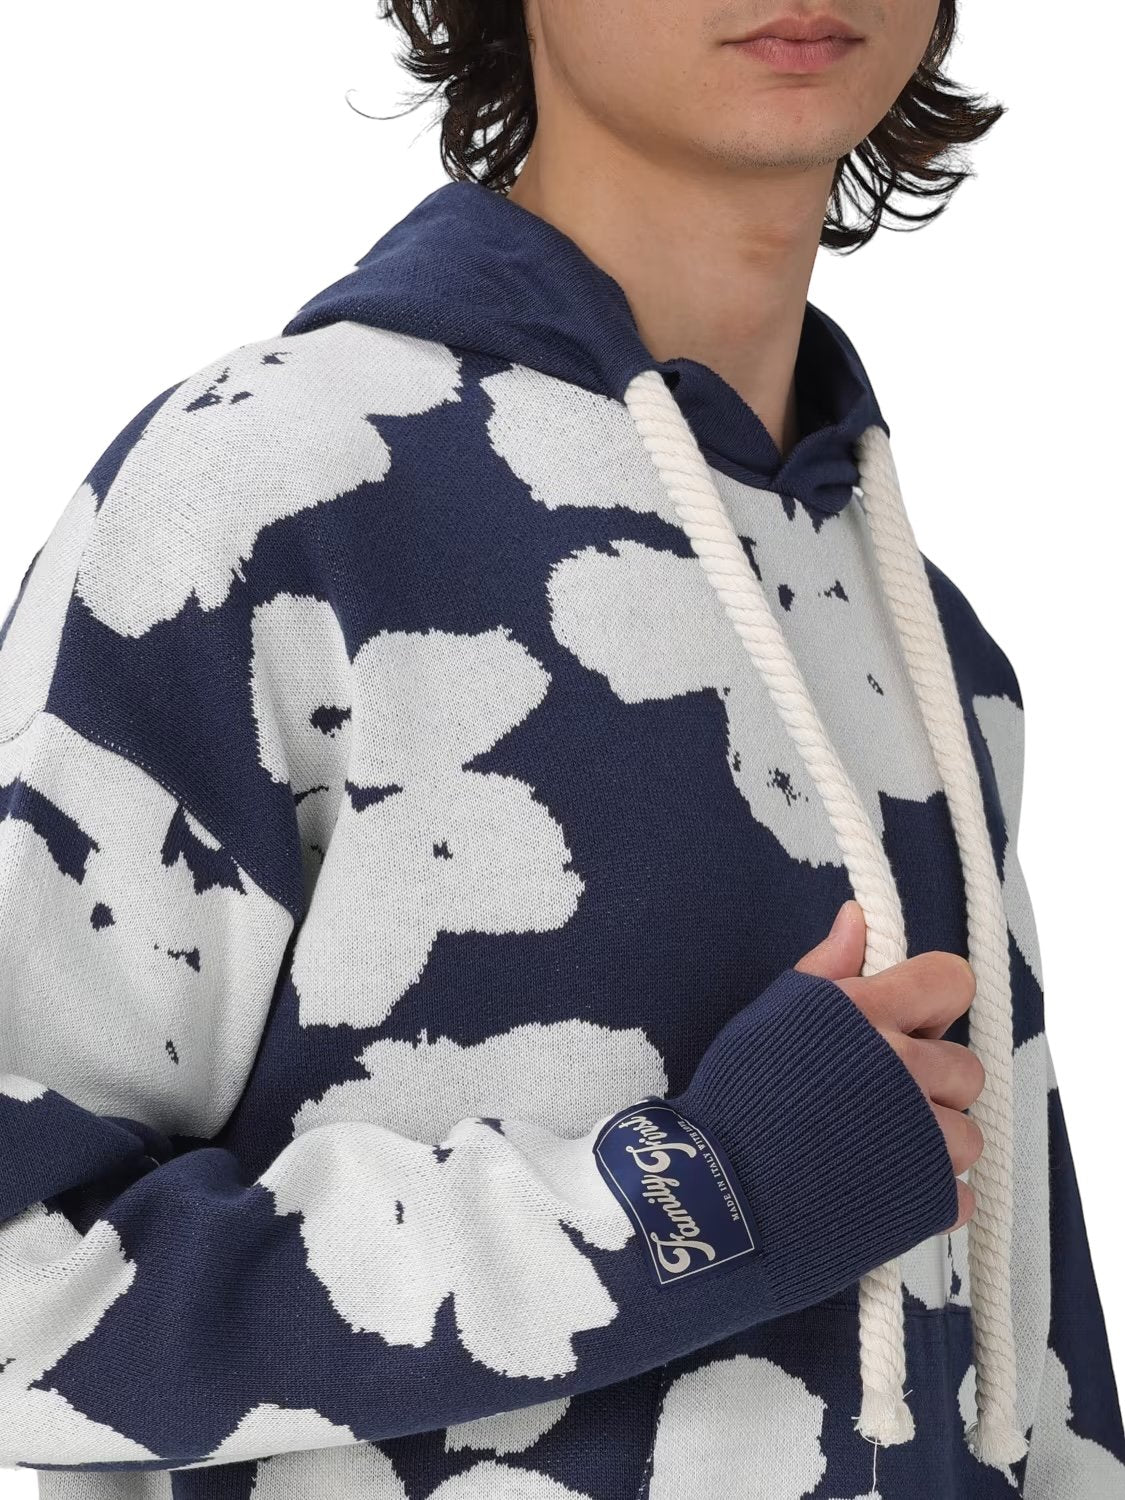 A young man wearing a navy blue and white floral patterned FAMILY FIRST SWS2405 HOODIE JAQUARD DB with a drawstring, against a black background.